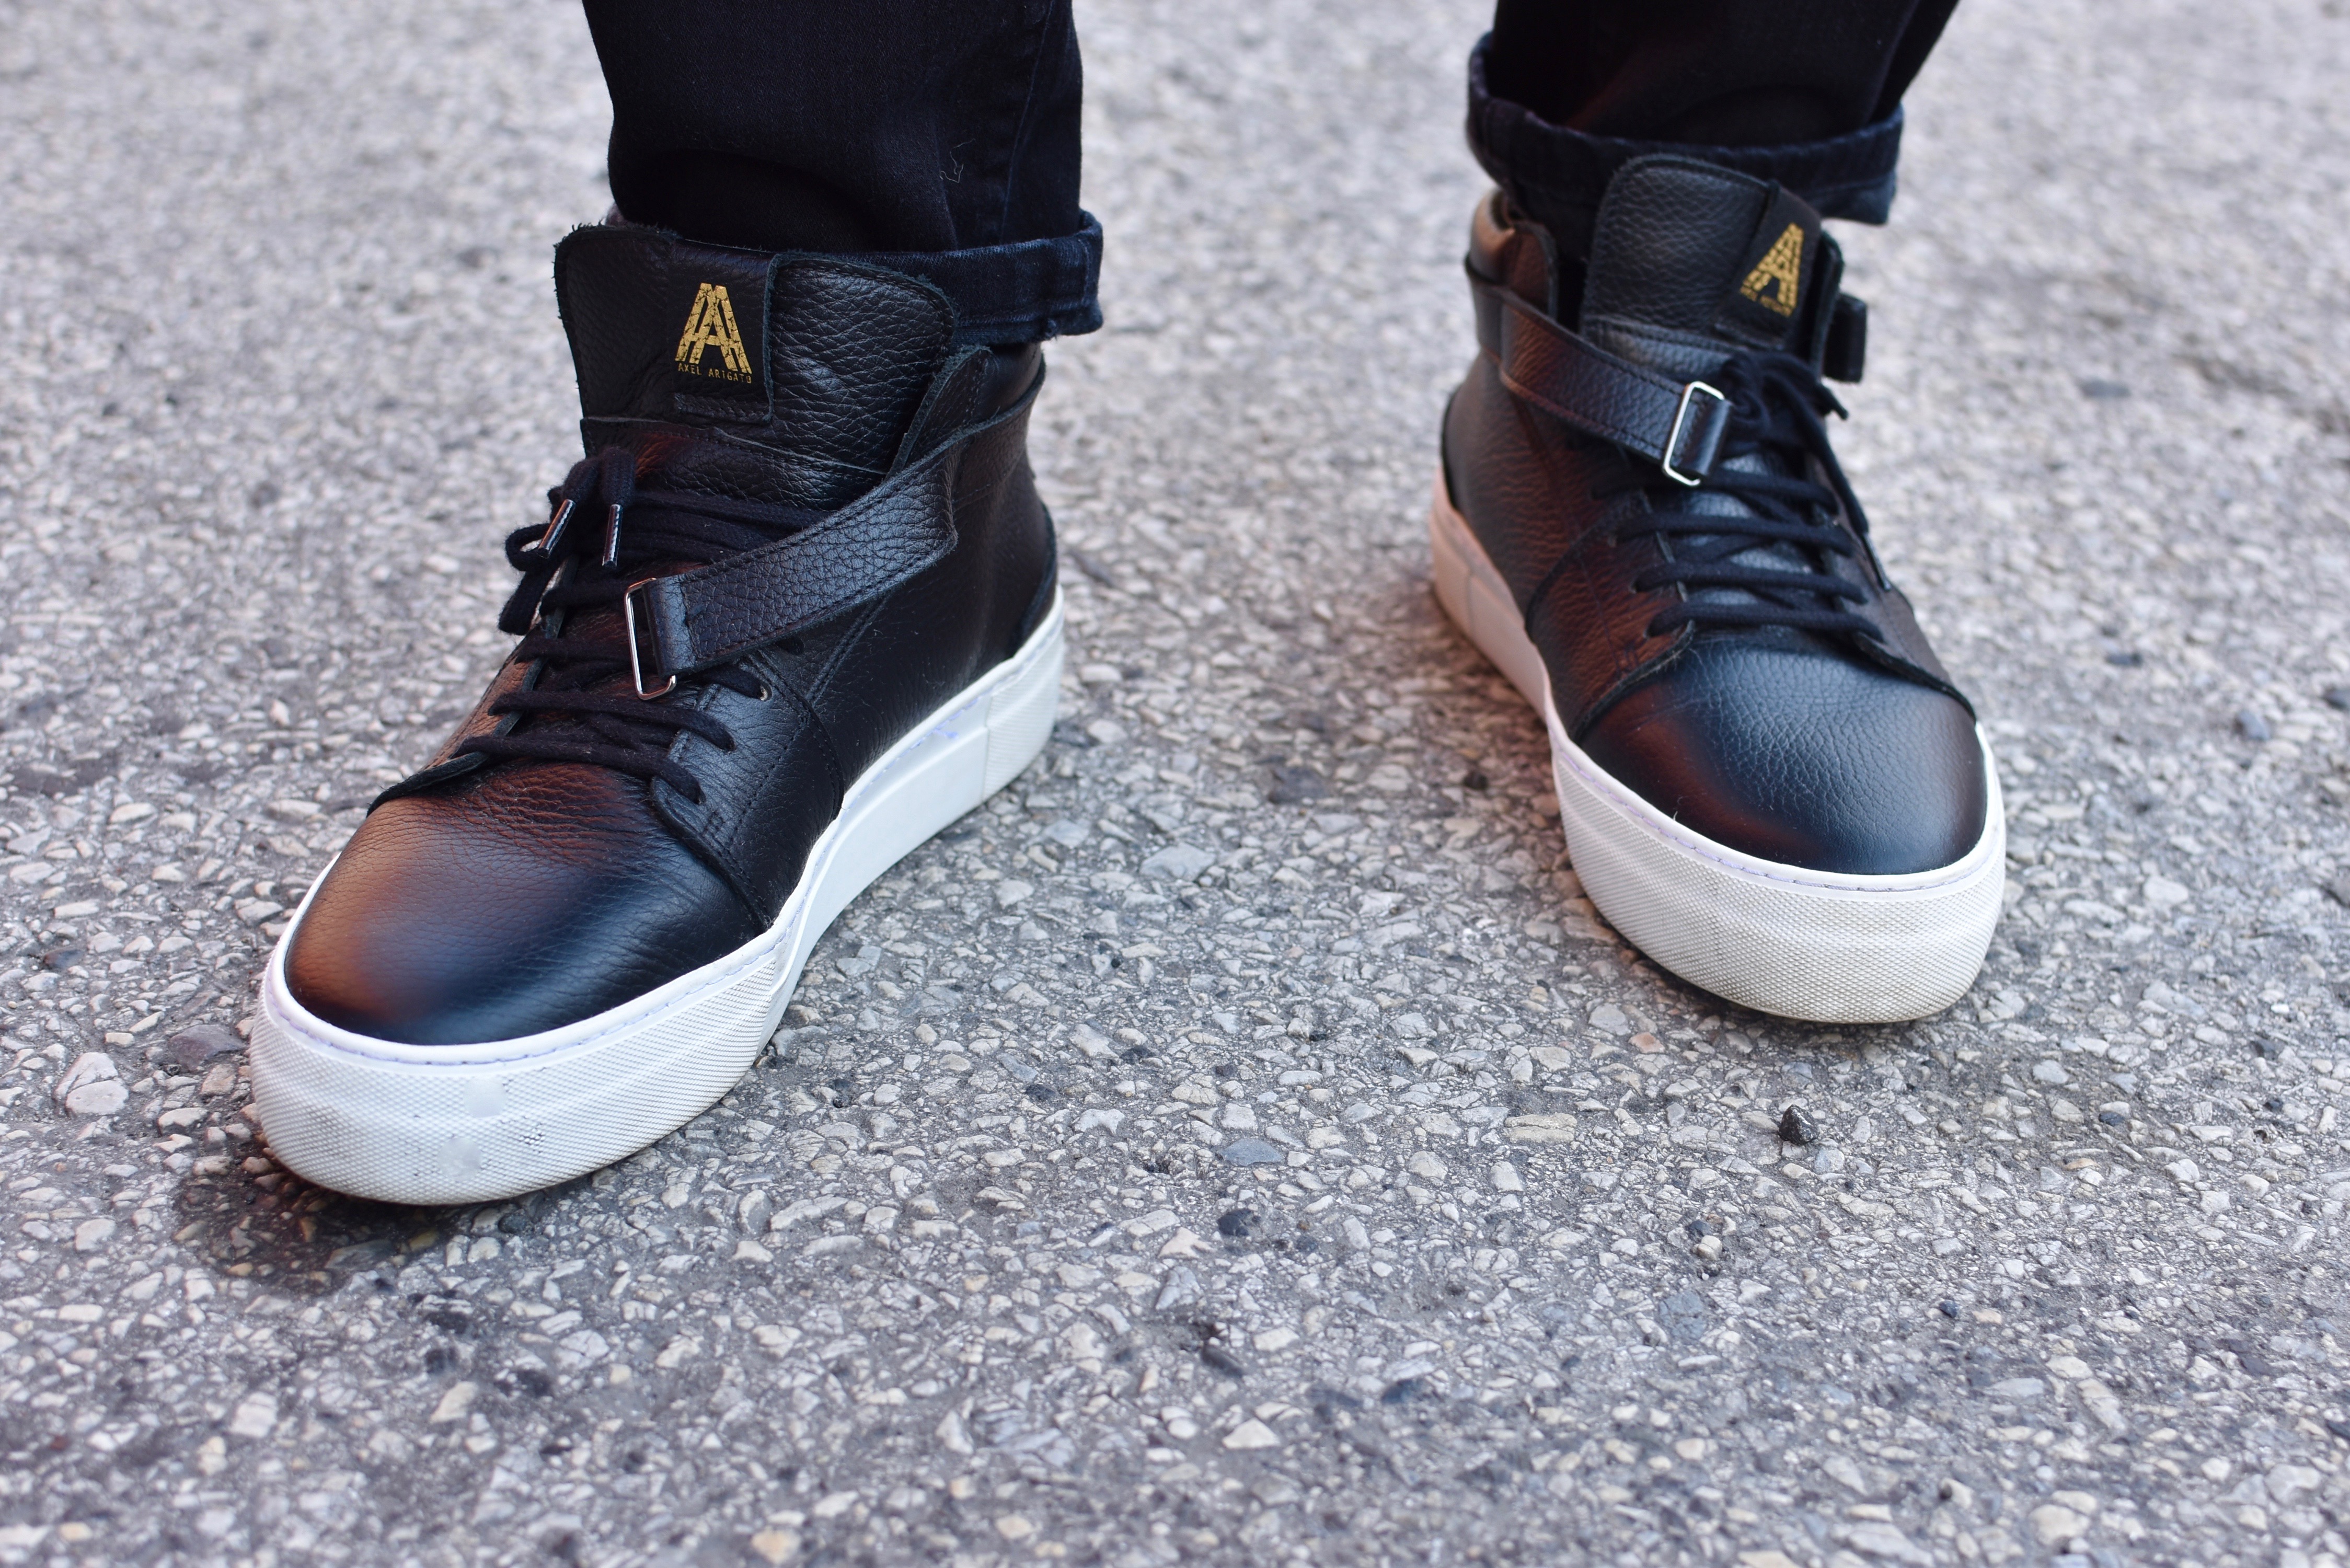 Men's Style Pro wearing cobbler union boots & axel arigato sneakers in boots vs sneakers